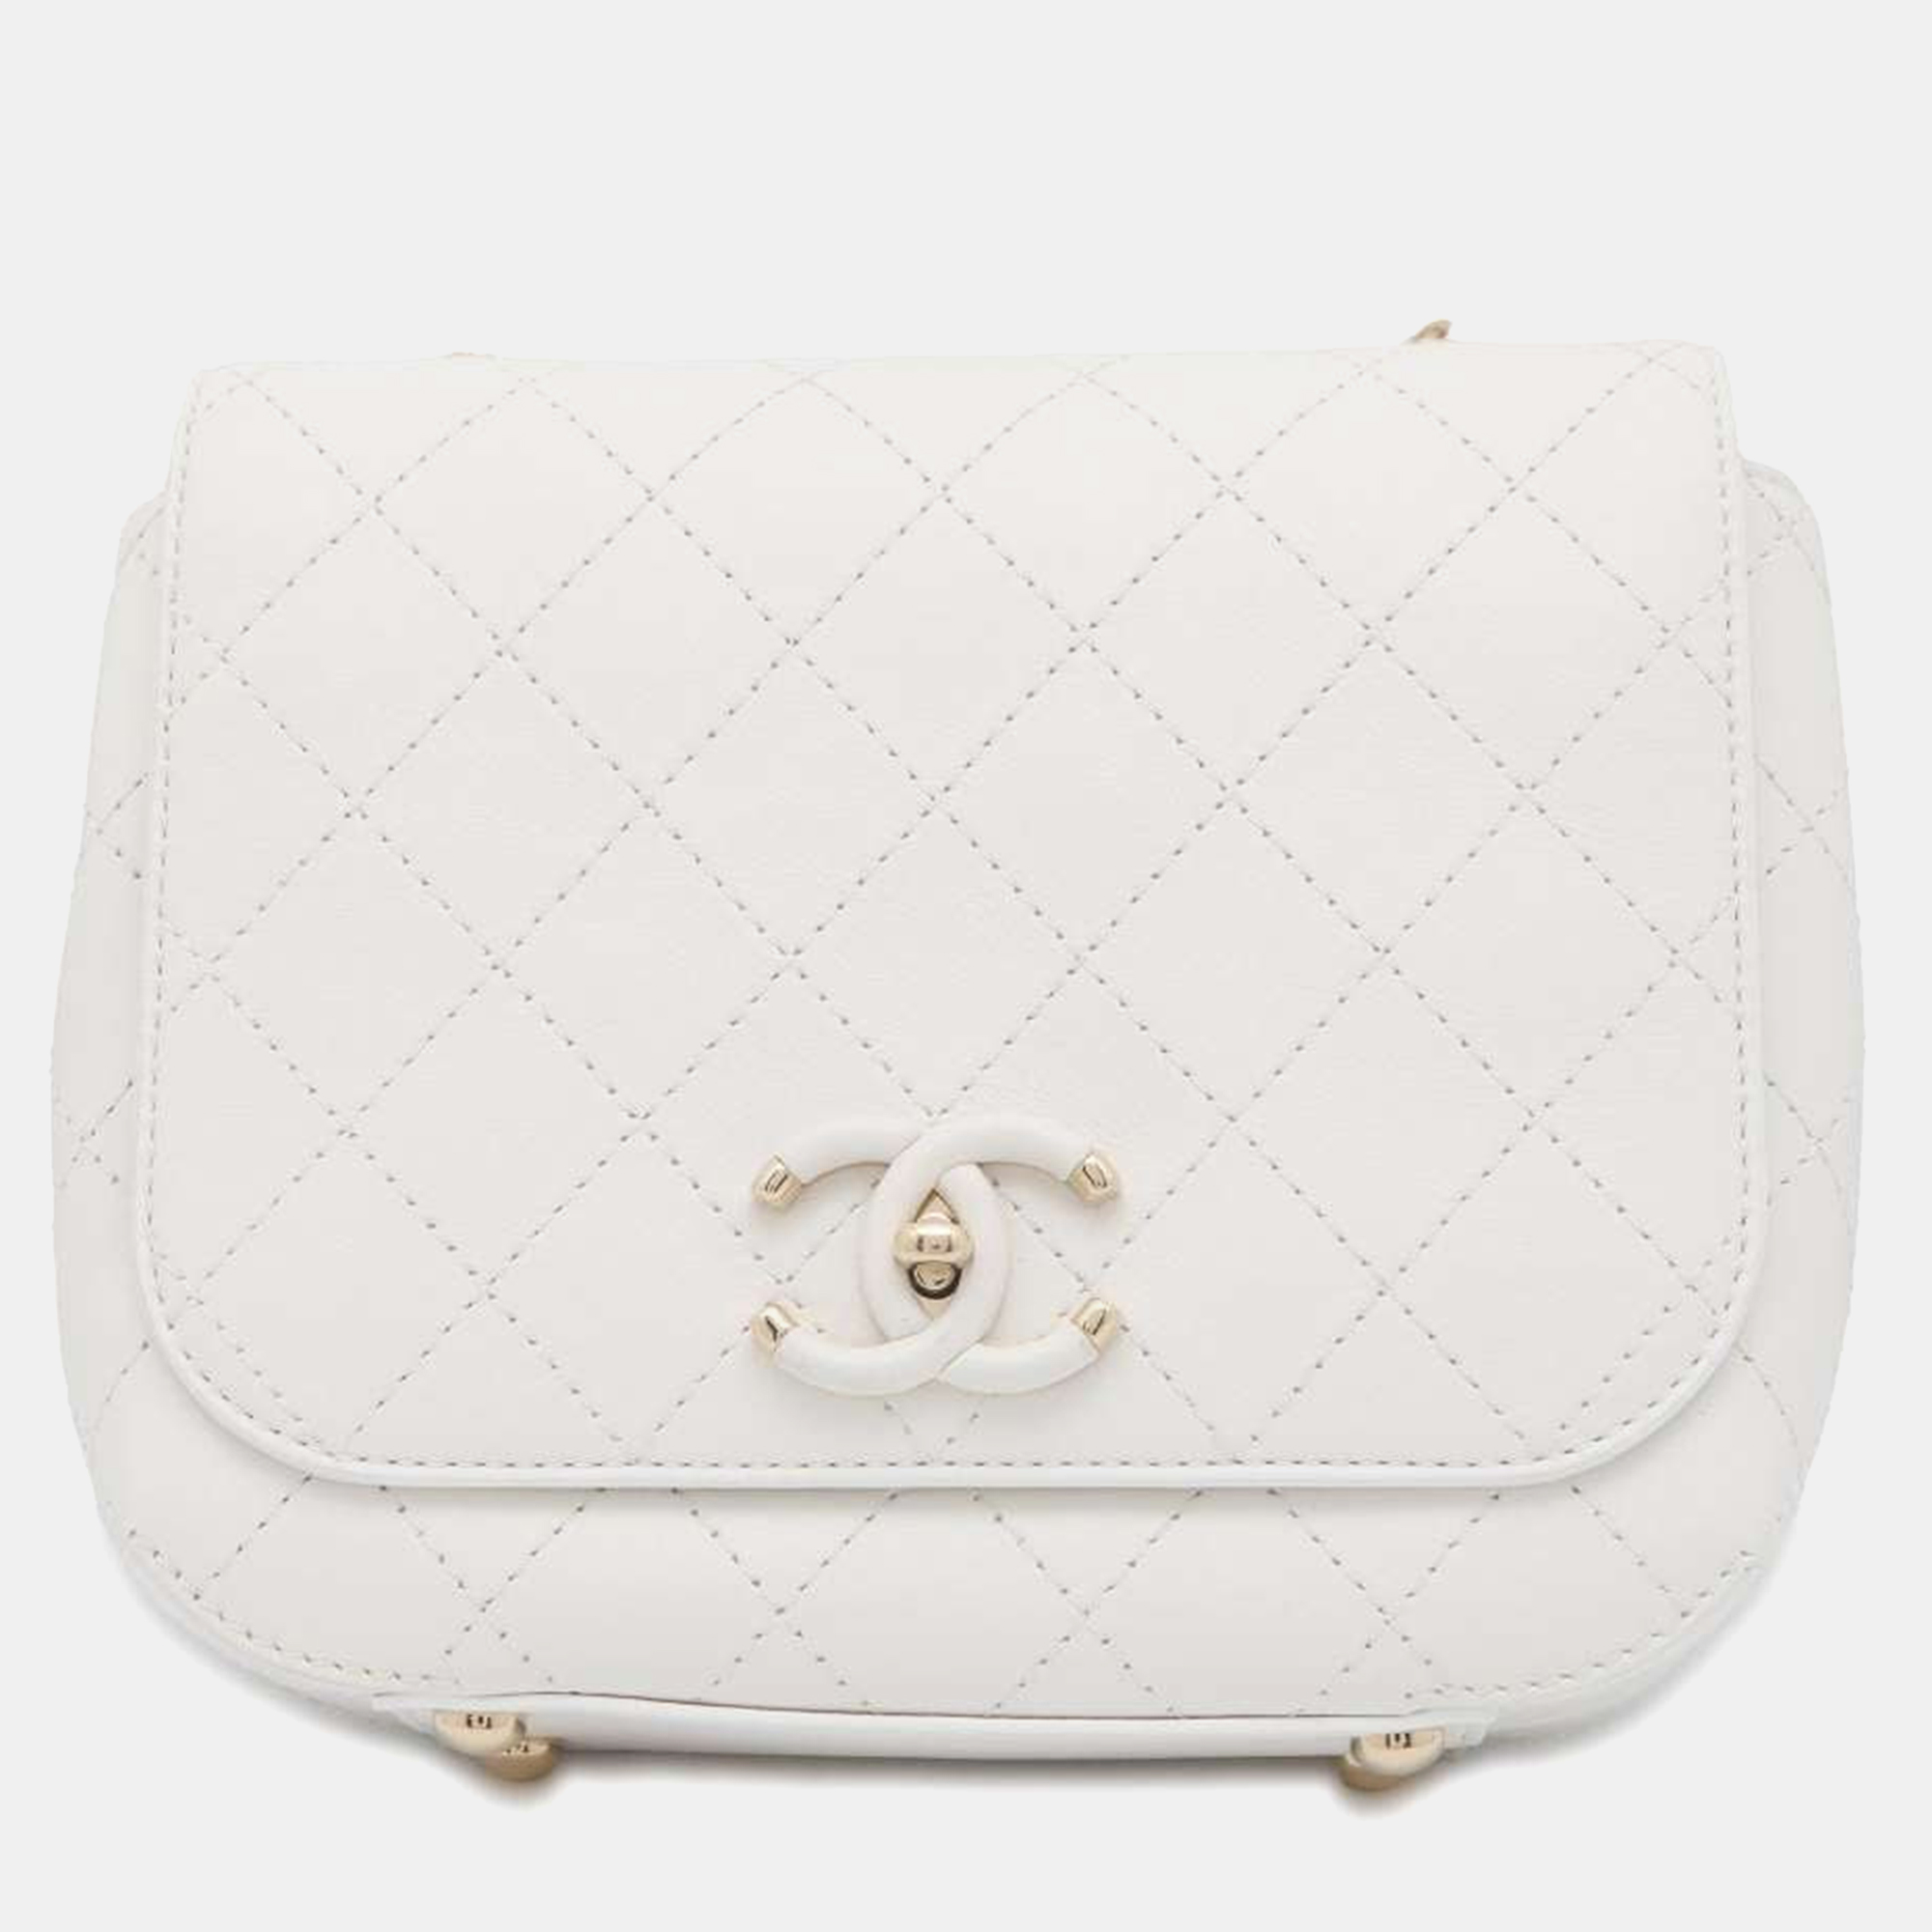 Chanel white leather  chain shoulder bag